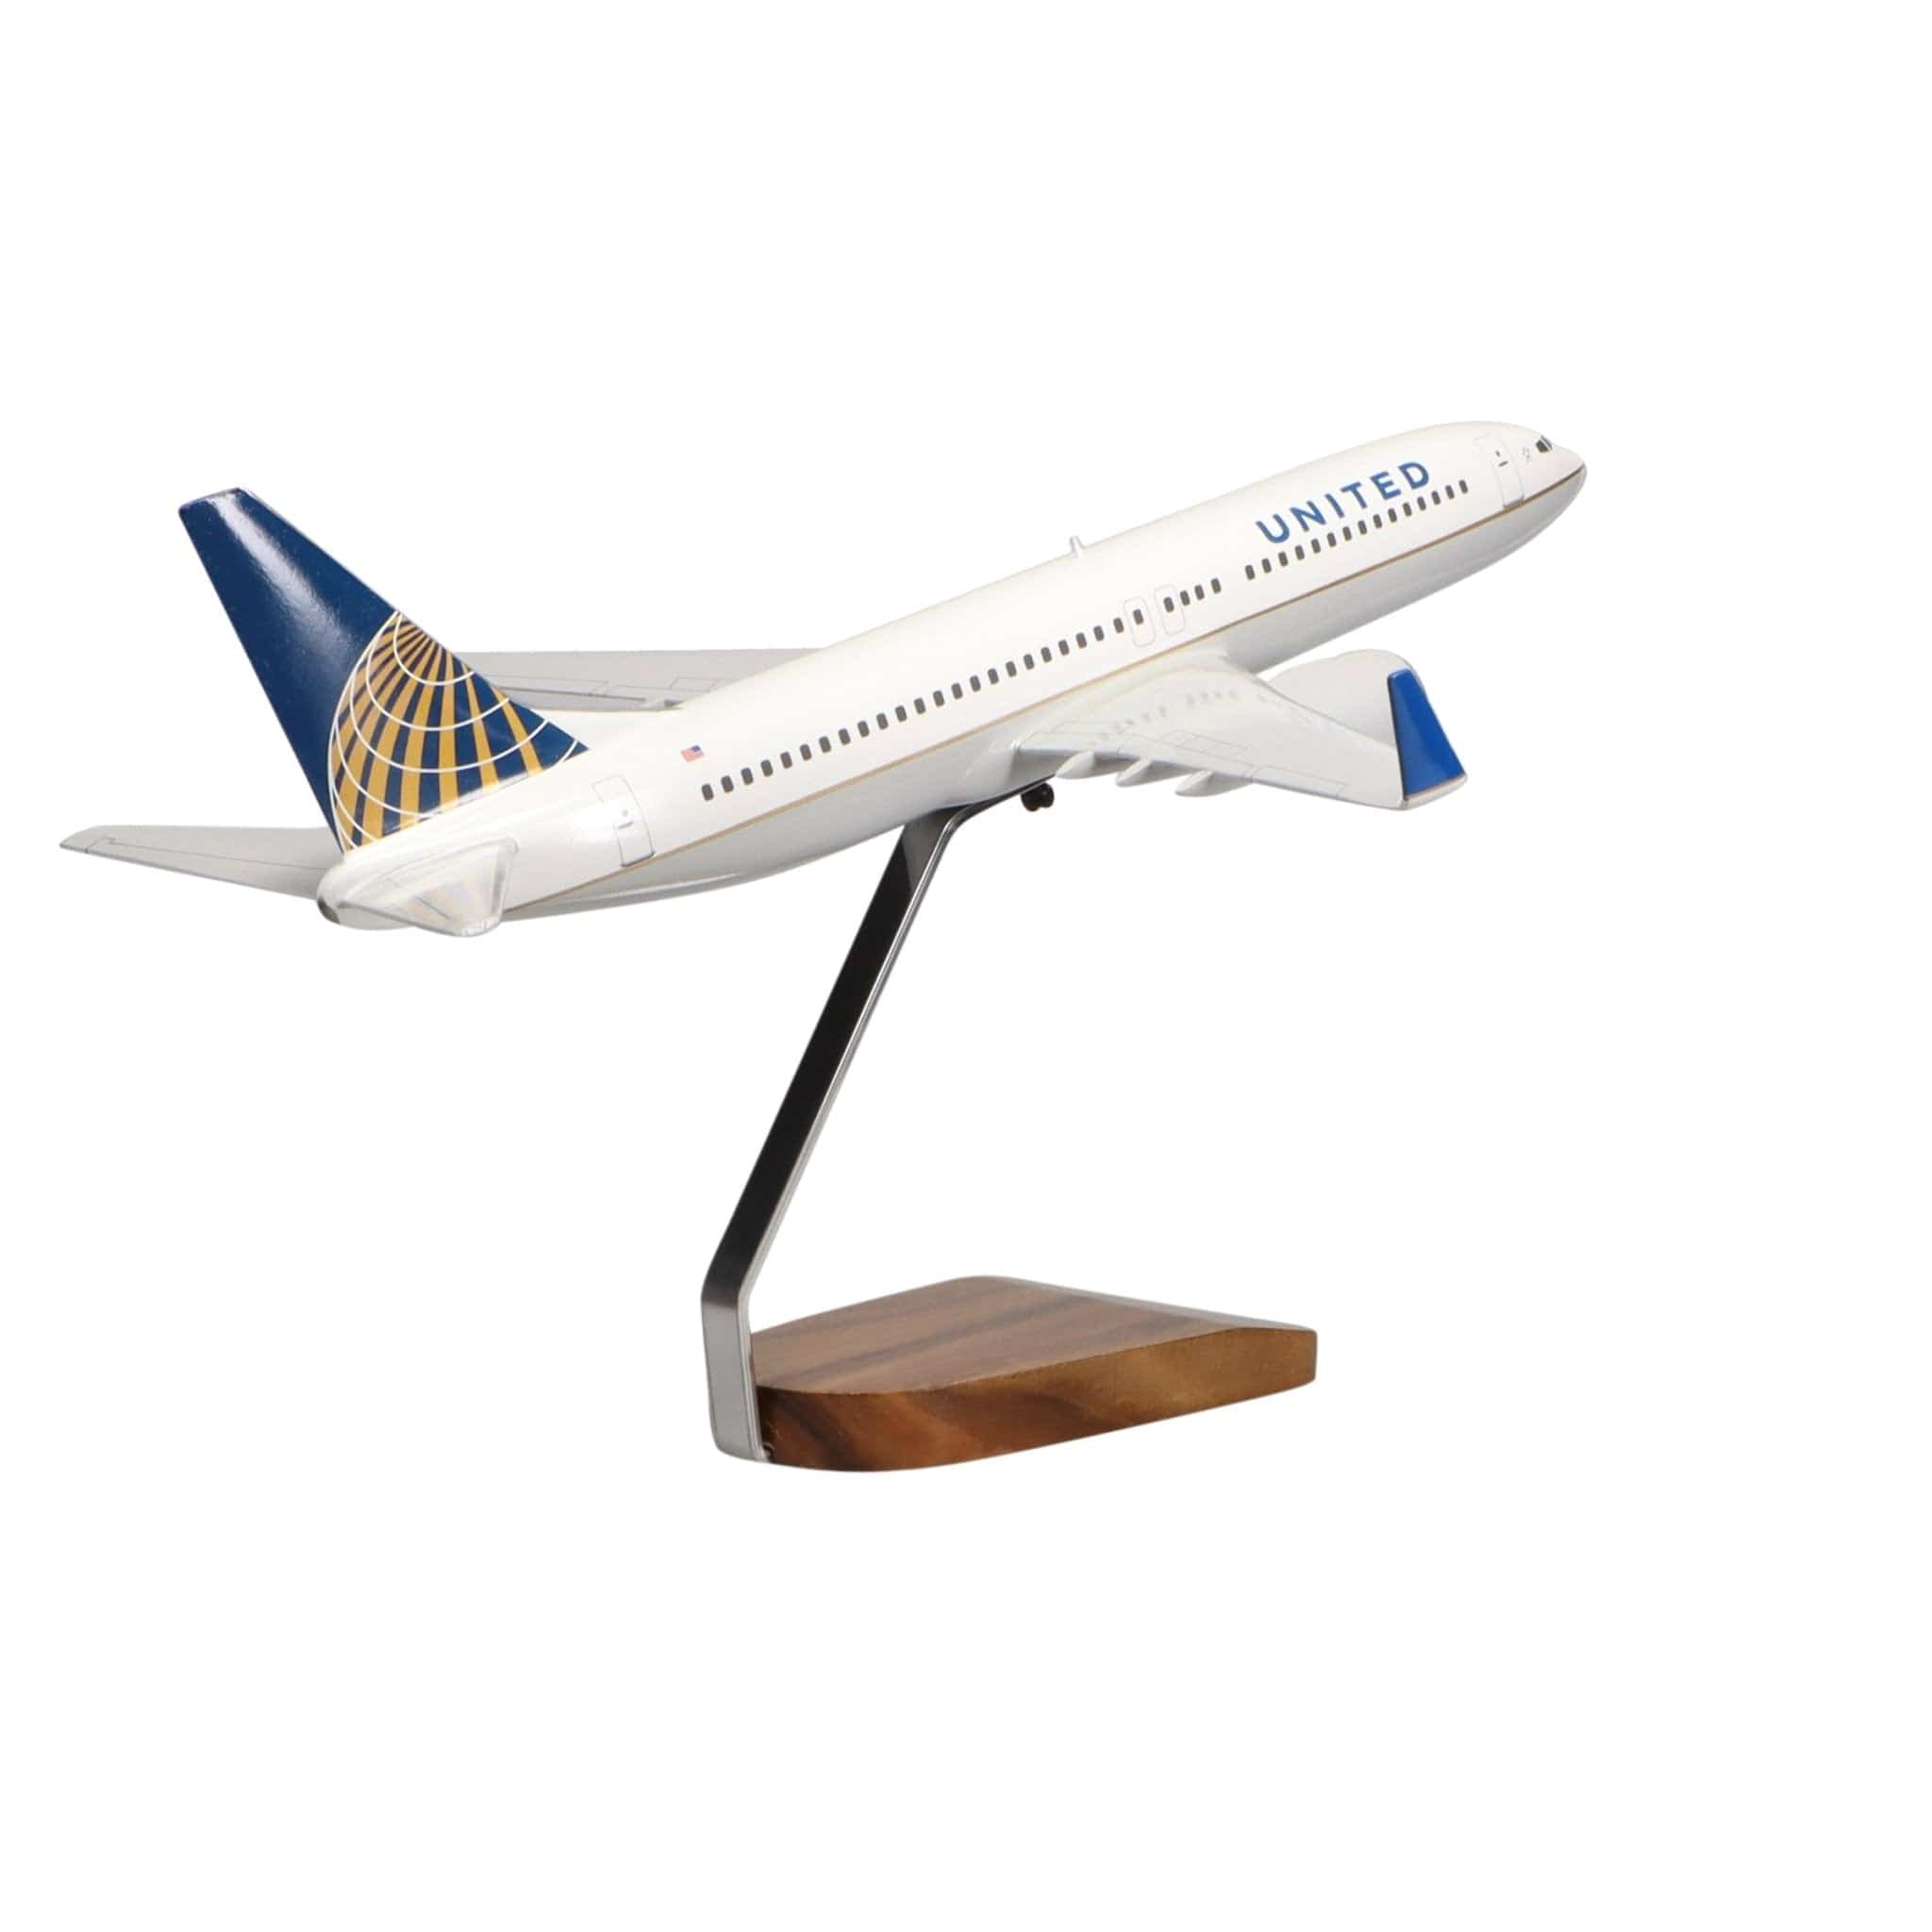 Boeing 737-800 United Airlines (Continental Merger Livery) Large Mahogany Model - PilotMall.com